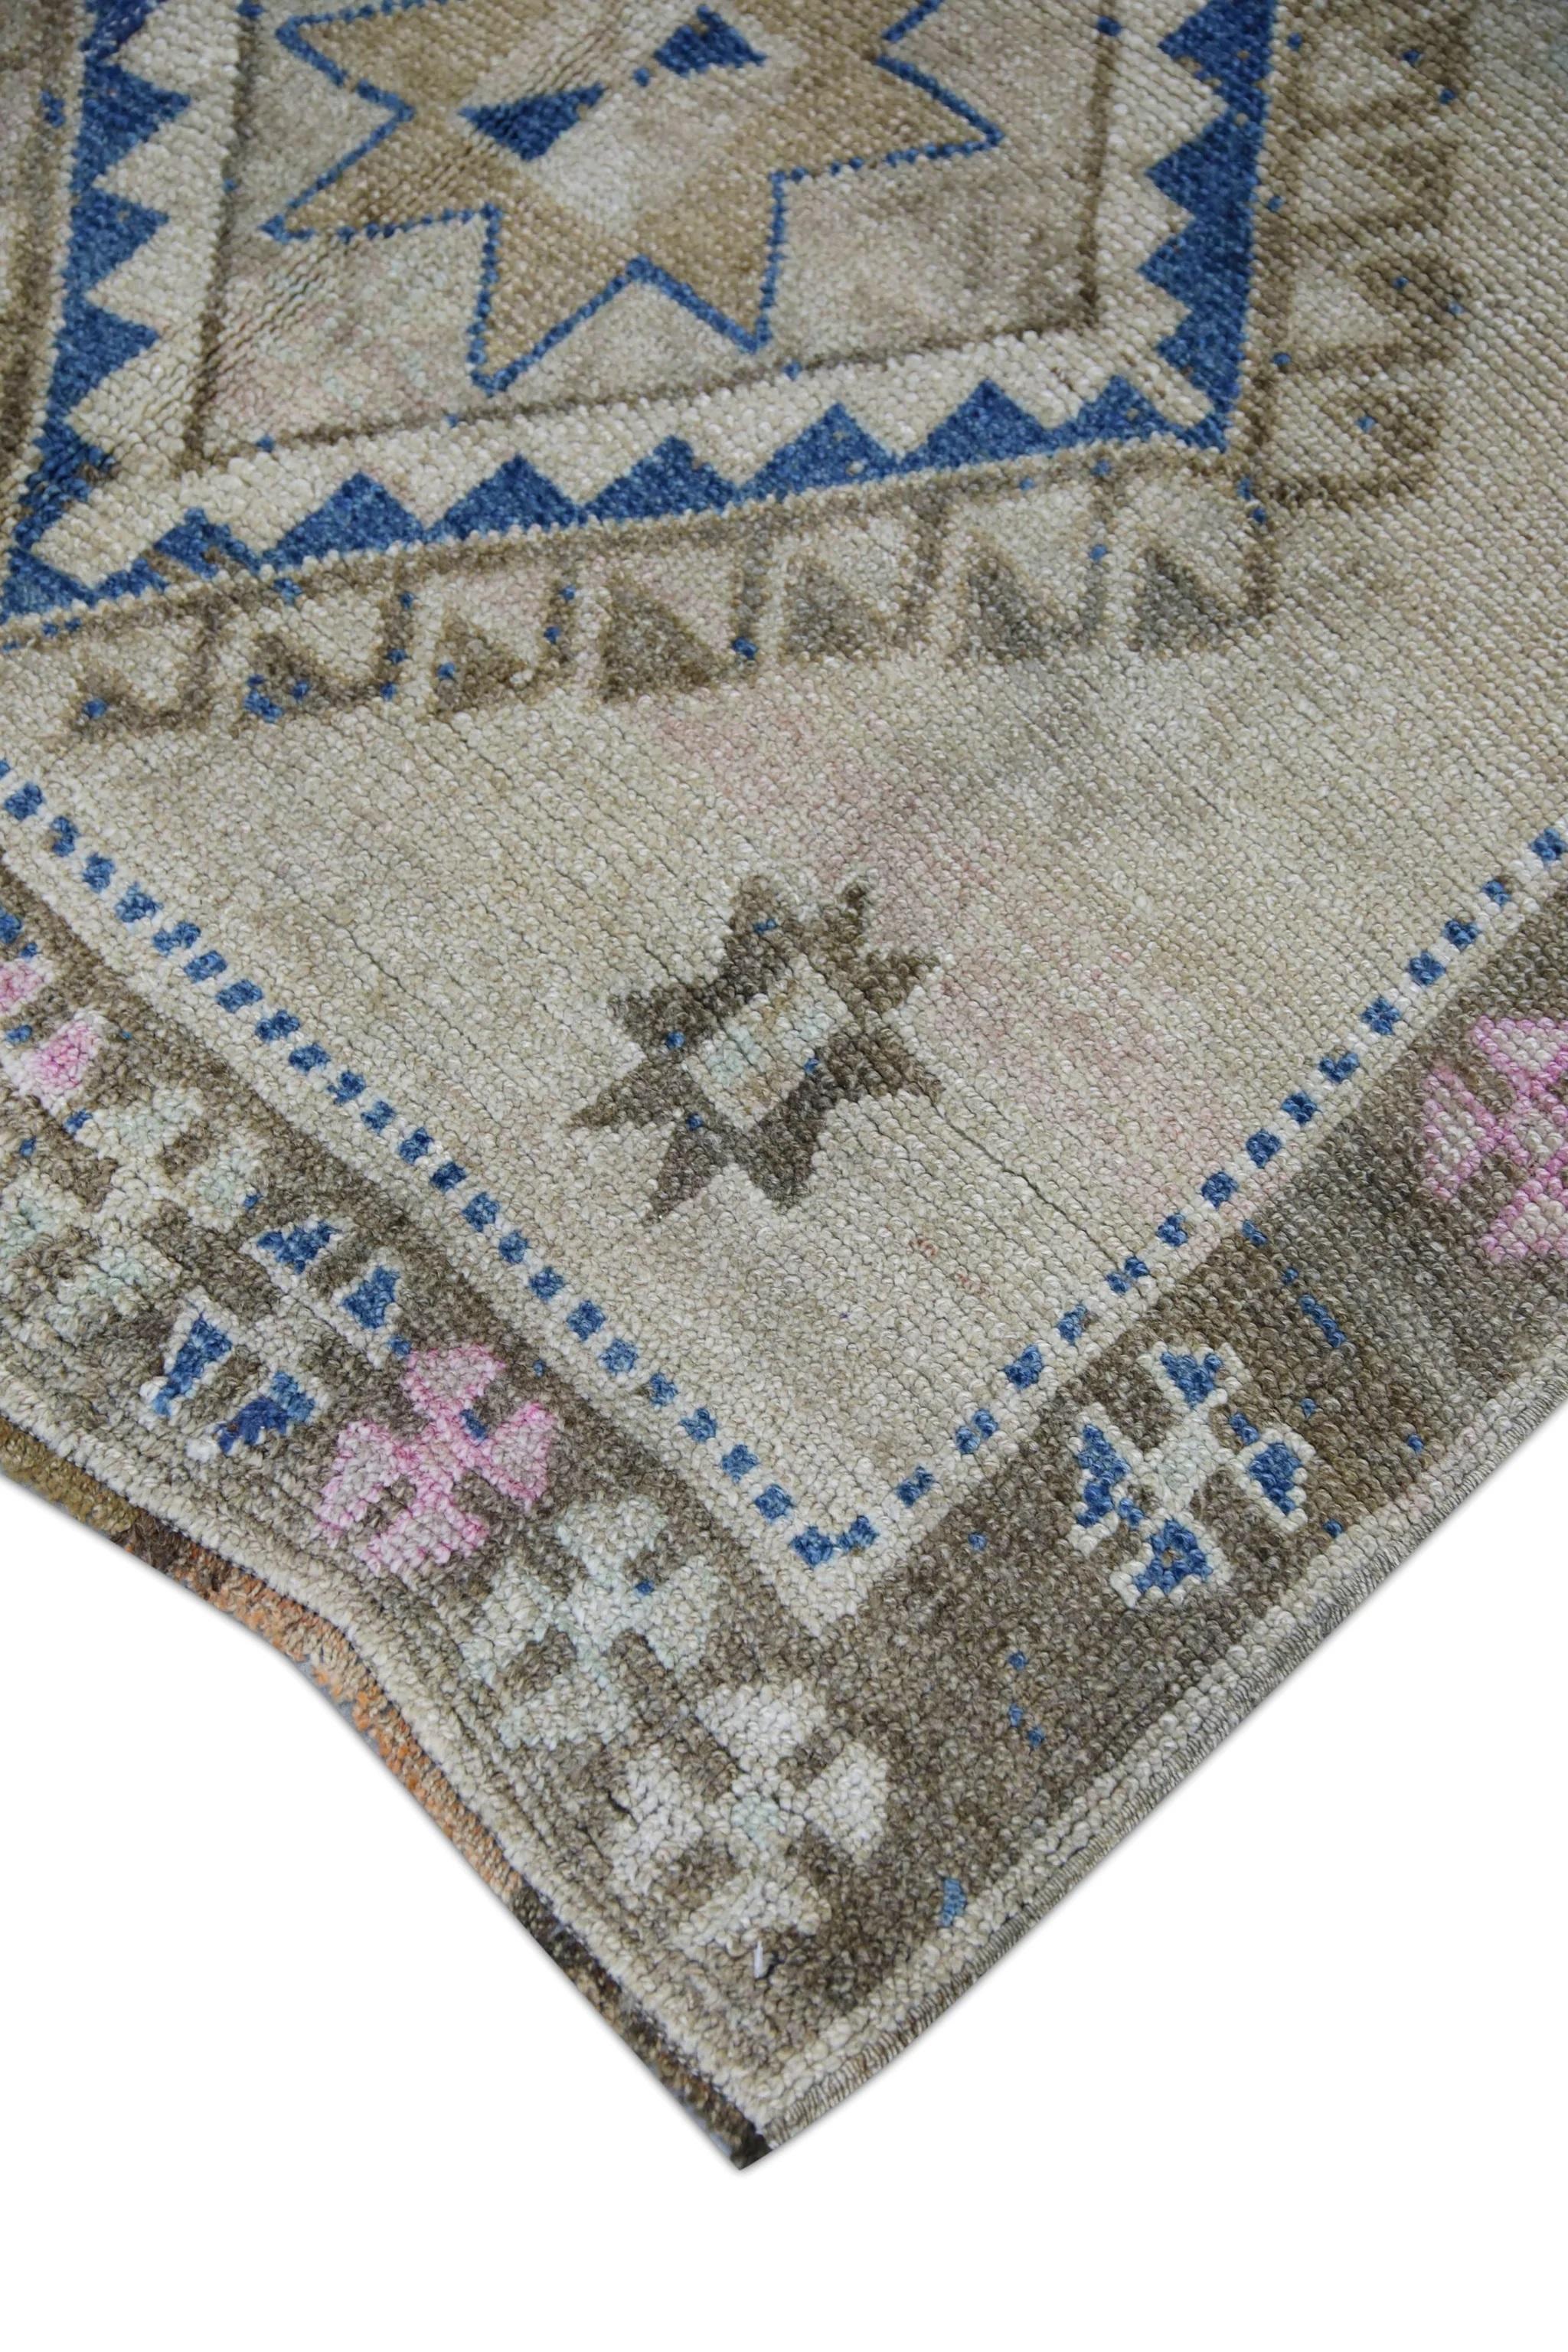 This exquisite vintage Turkish Oushak rug is a stunning example of traditional craftsmanship and timeless beauty. Hand-knotted from premium wool fibers, this rug features intricate patterns and vivid colors that are all naturally derived from